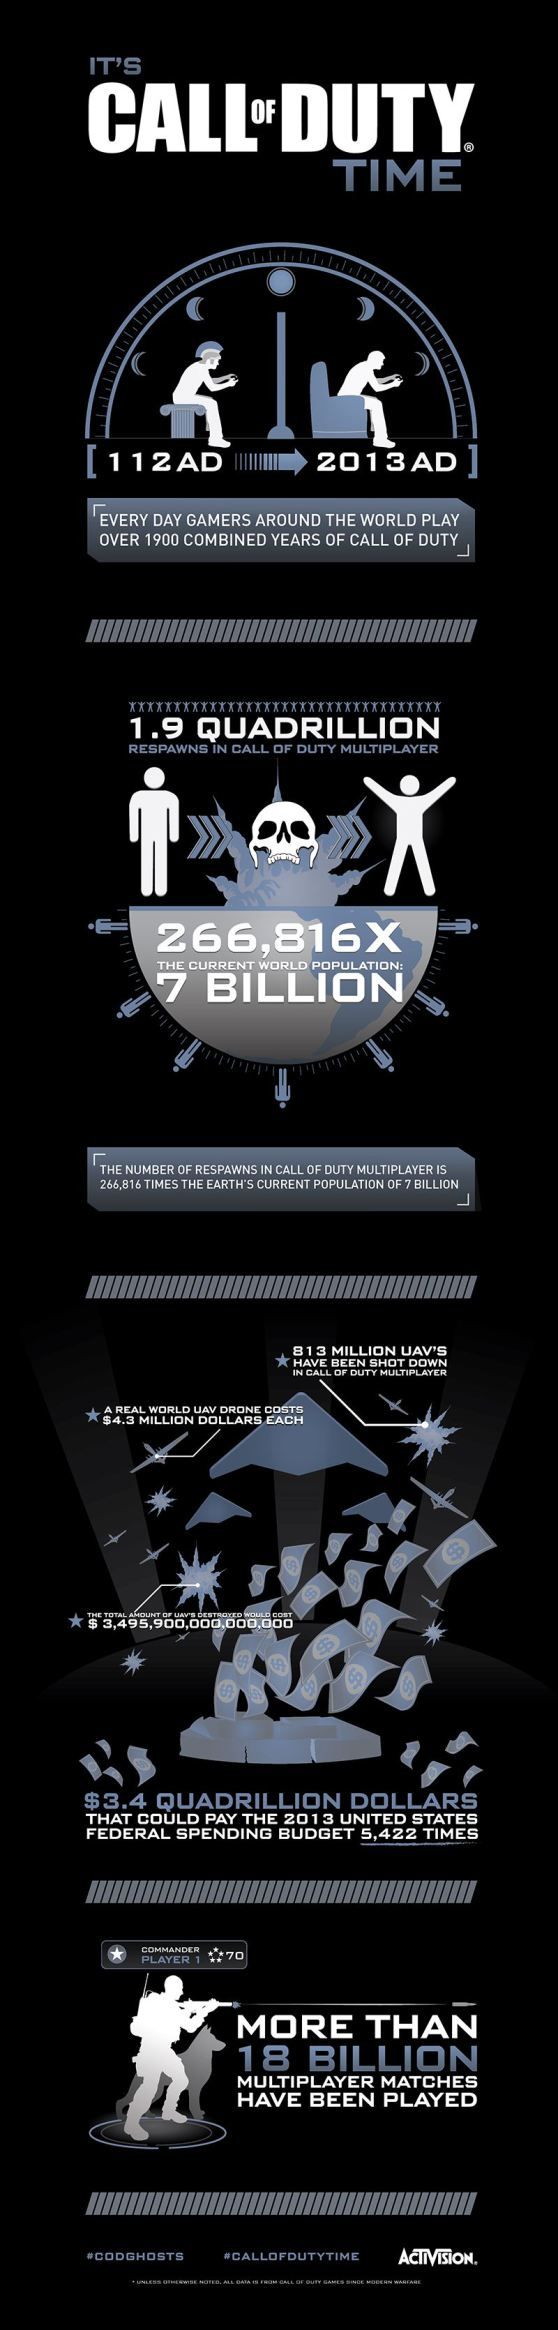 It's Call of Duty time - insane stats from Activision since Infinity Ward made t...